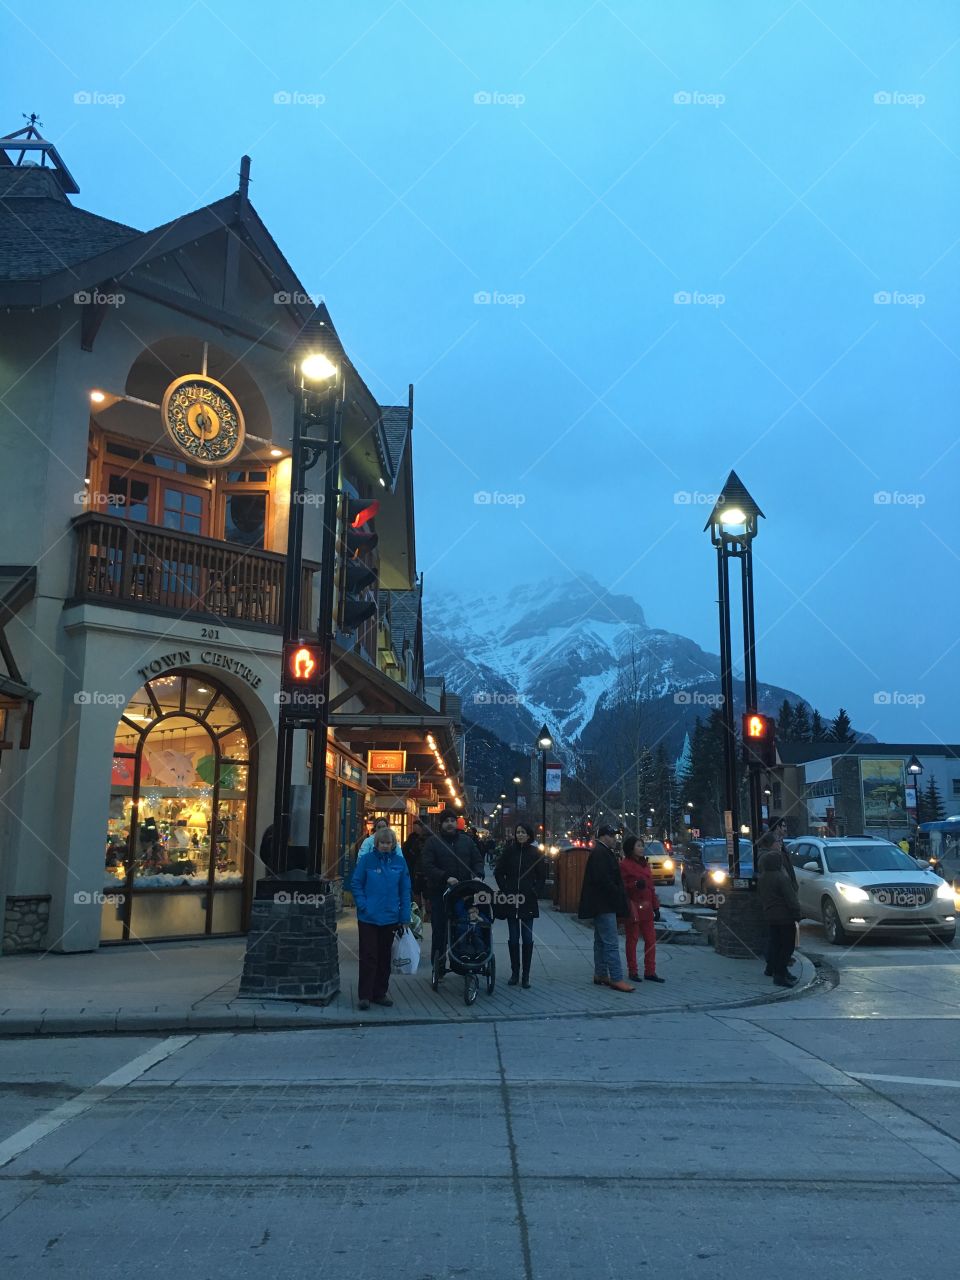 Looking towards Cascade Mountain which stands tall over Banff Ave